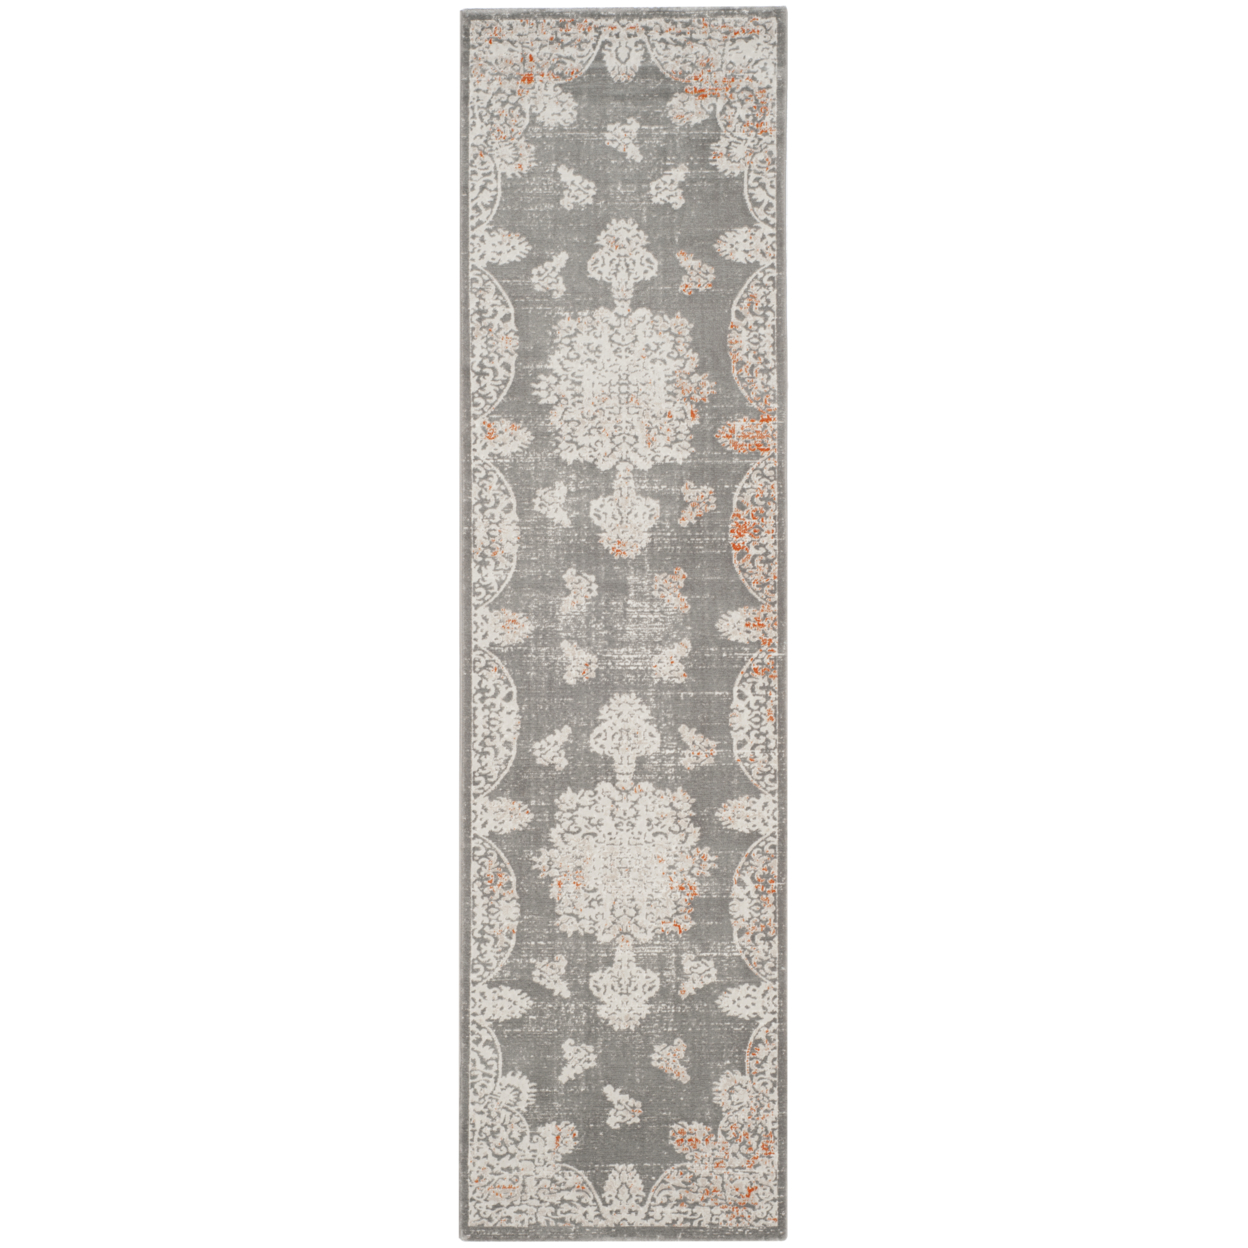 SAFAVIEH Passion Collection PAS406F Grey / Ivory Rug - 8' X 11'